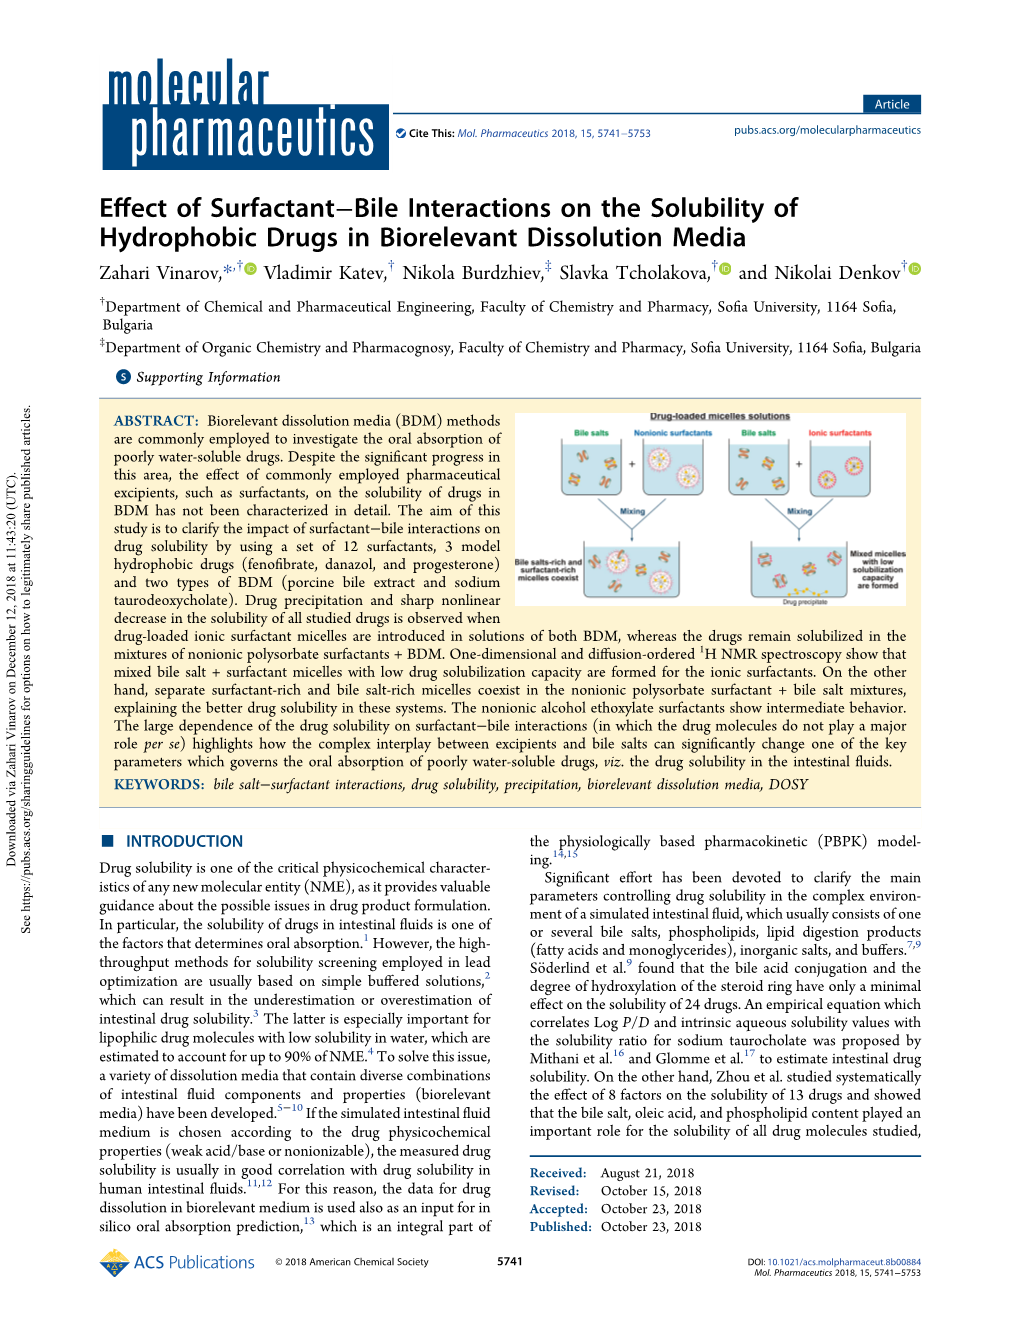 Effect of Surfactant–Bile Interactions on the Solubility of Hydrophobic